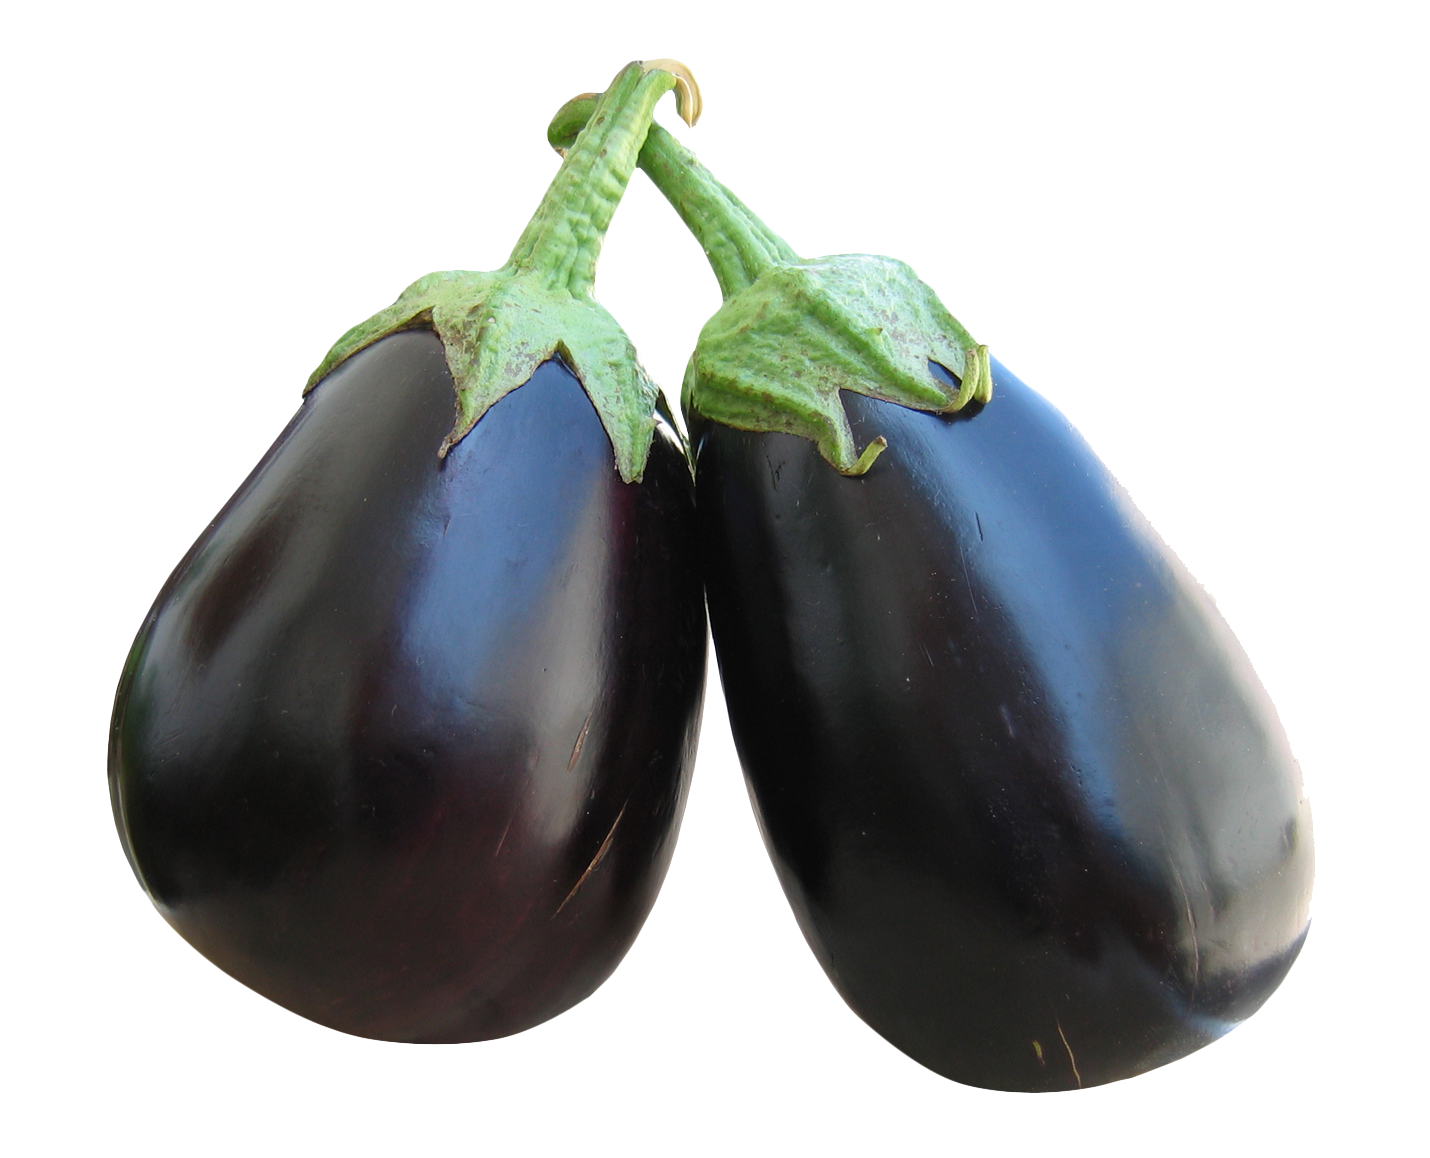 Two Eggplants With Green Stems